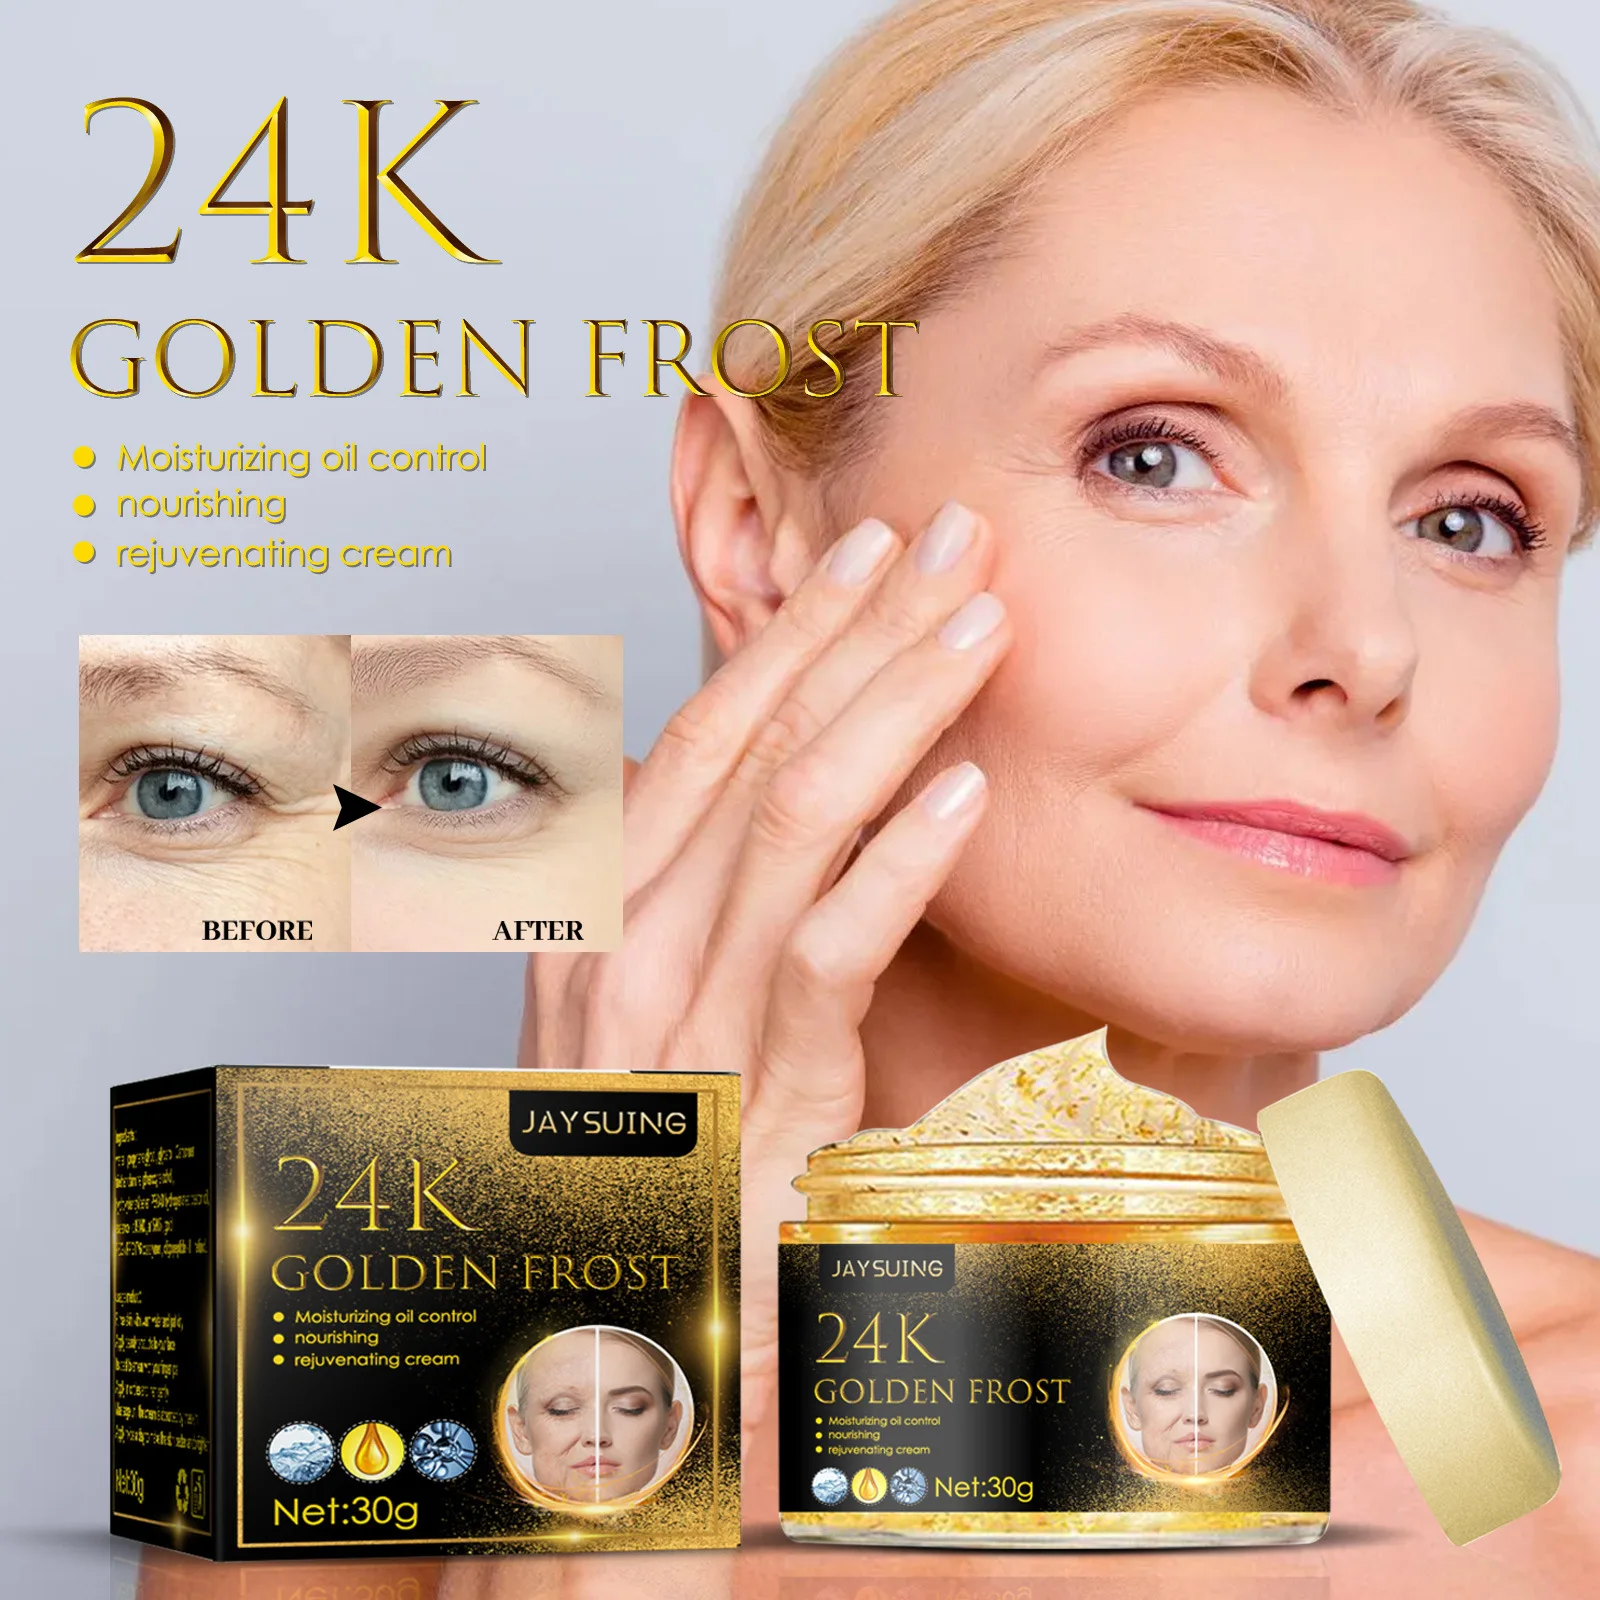 24k Gold Wrinkle Cream Firming Lifting Anti-aging Fade Fine Lines Whitening Brighten Skin Moisturizing Face Beauty Care Products